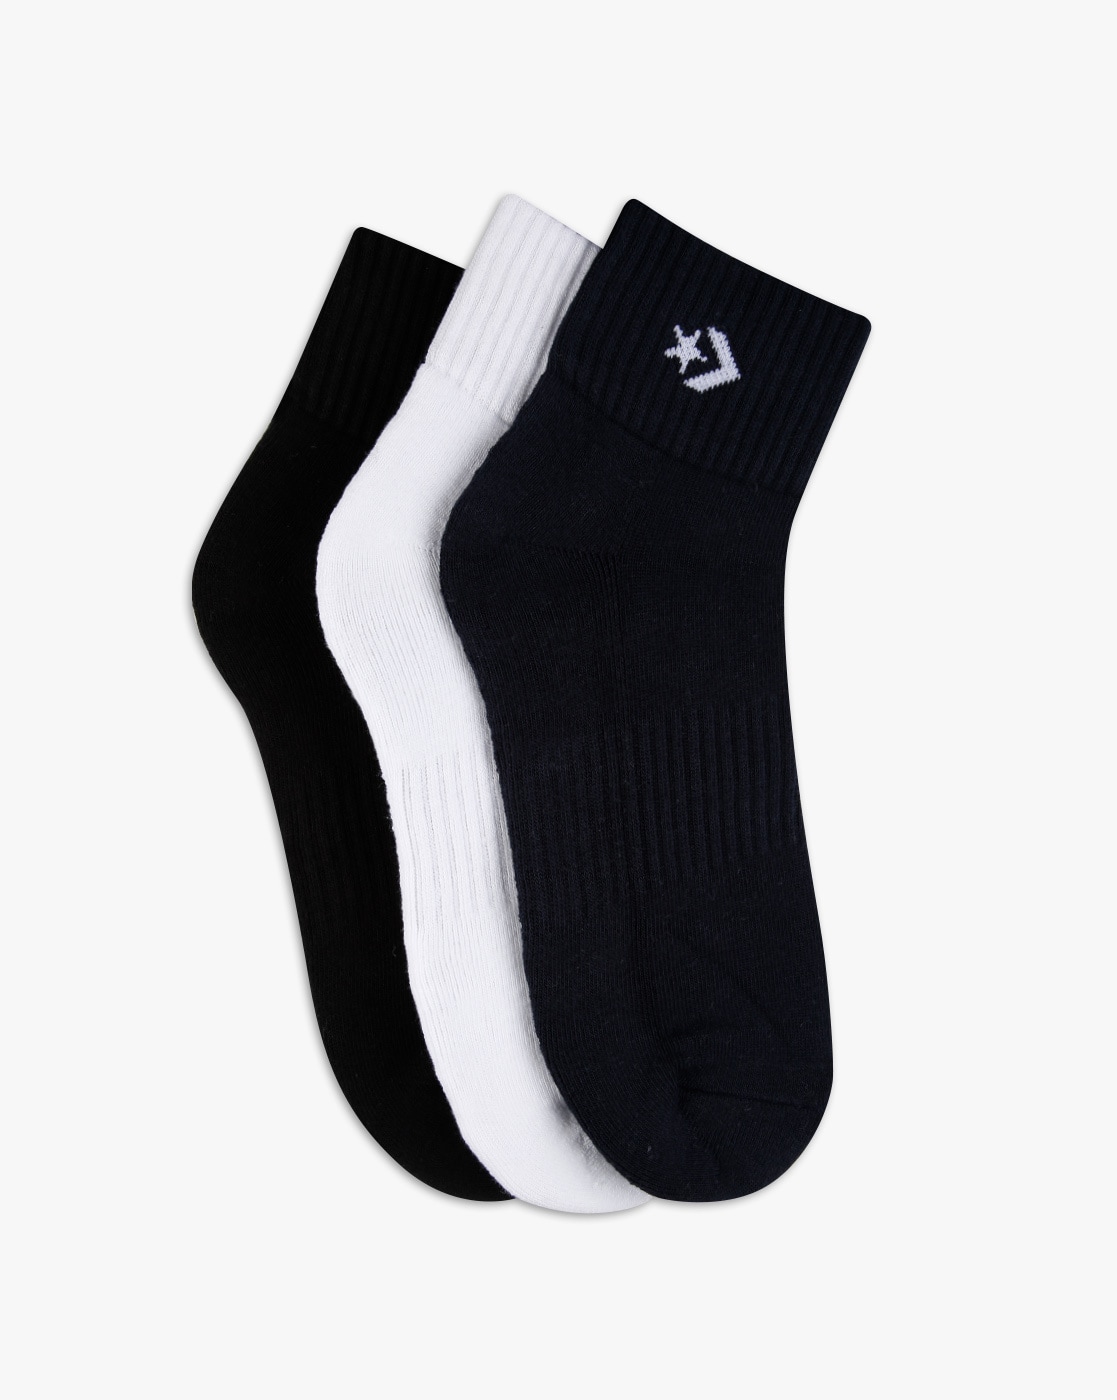 Buy Assorted Socks for Men by CONVERSE Online 